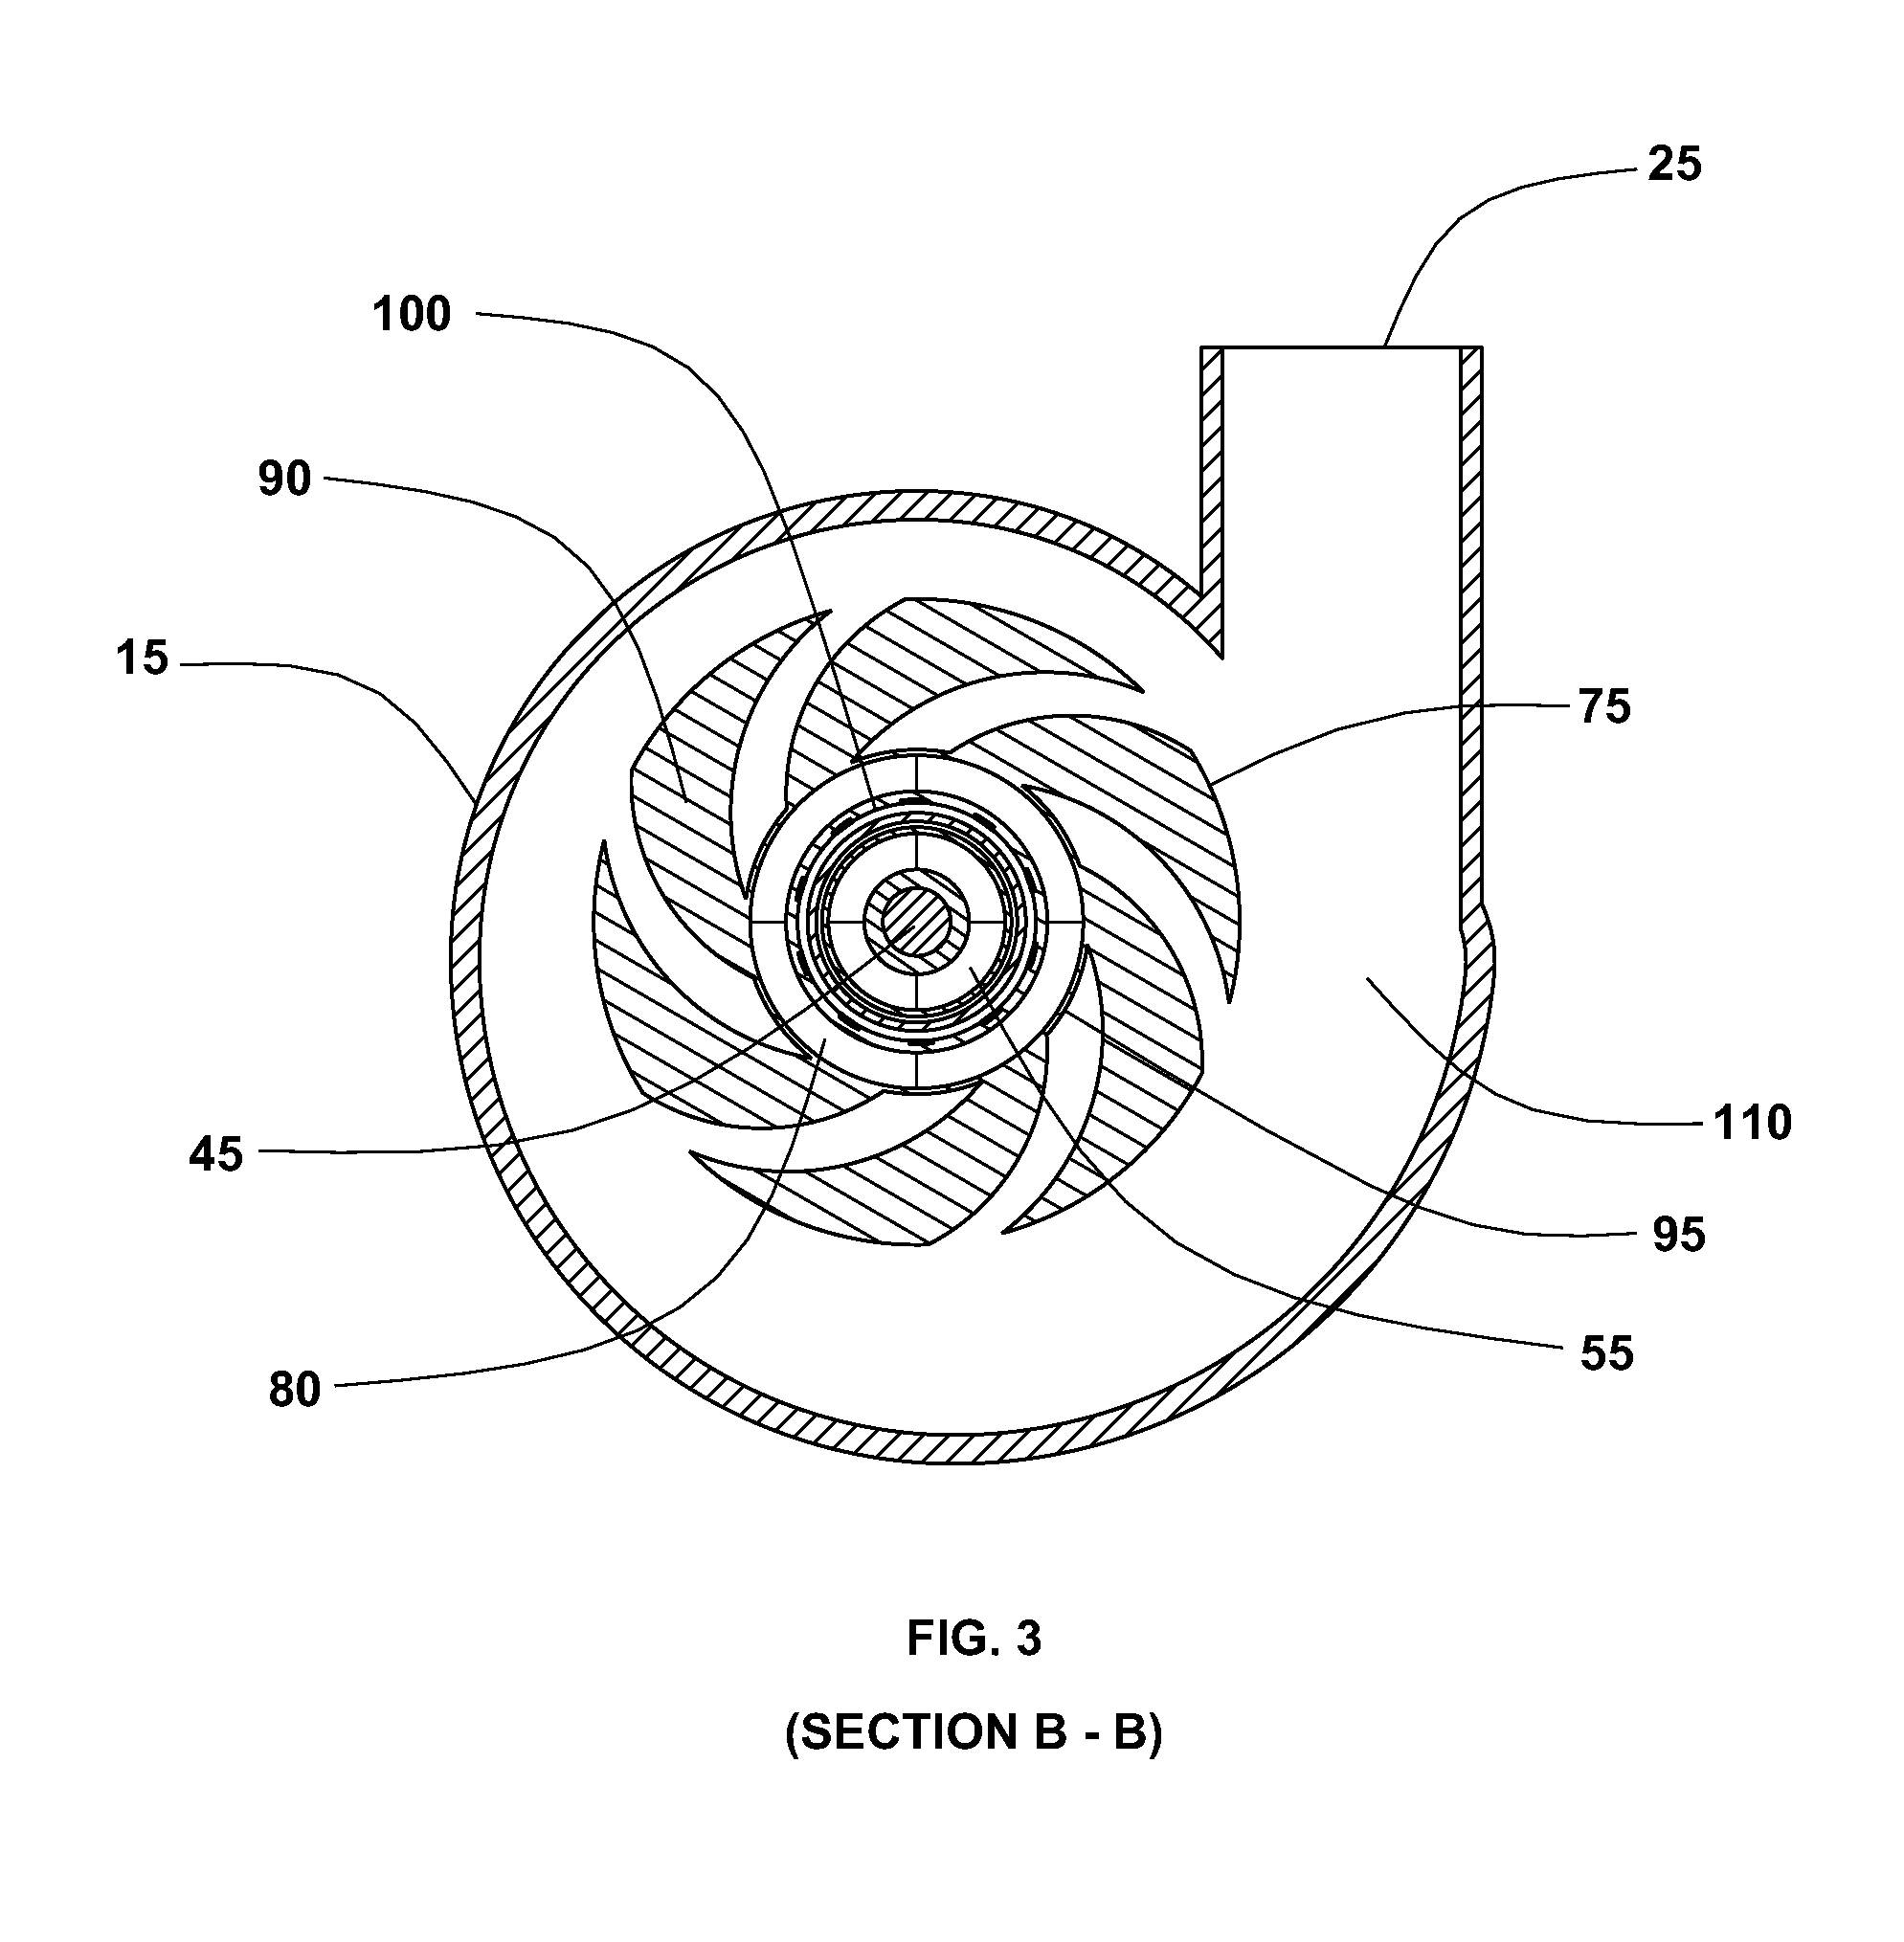 Cardiac support systems and methods for chronic use